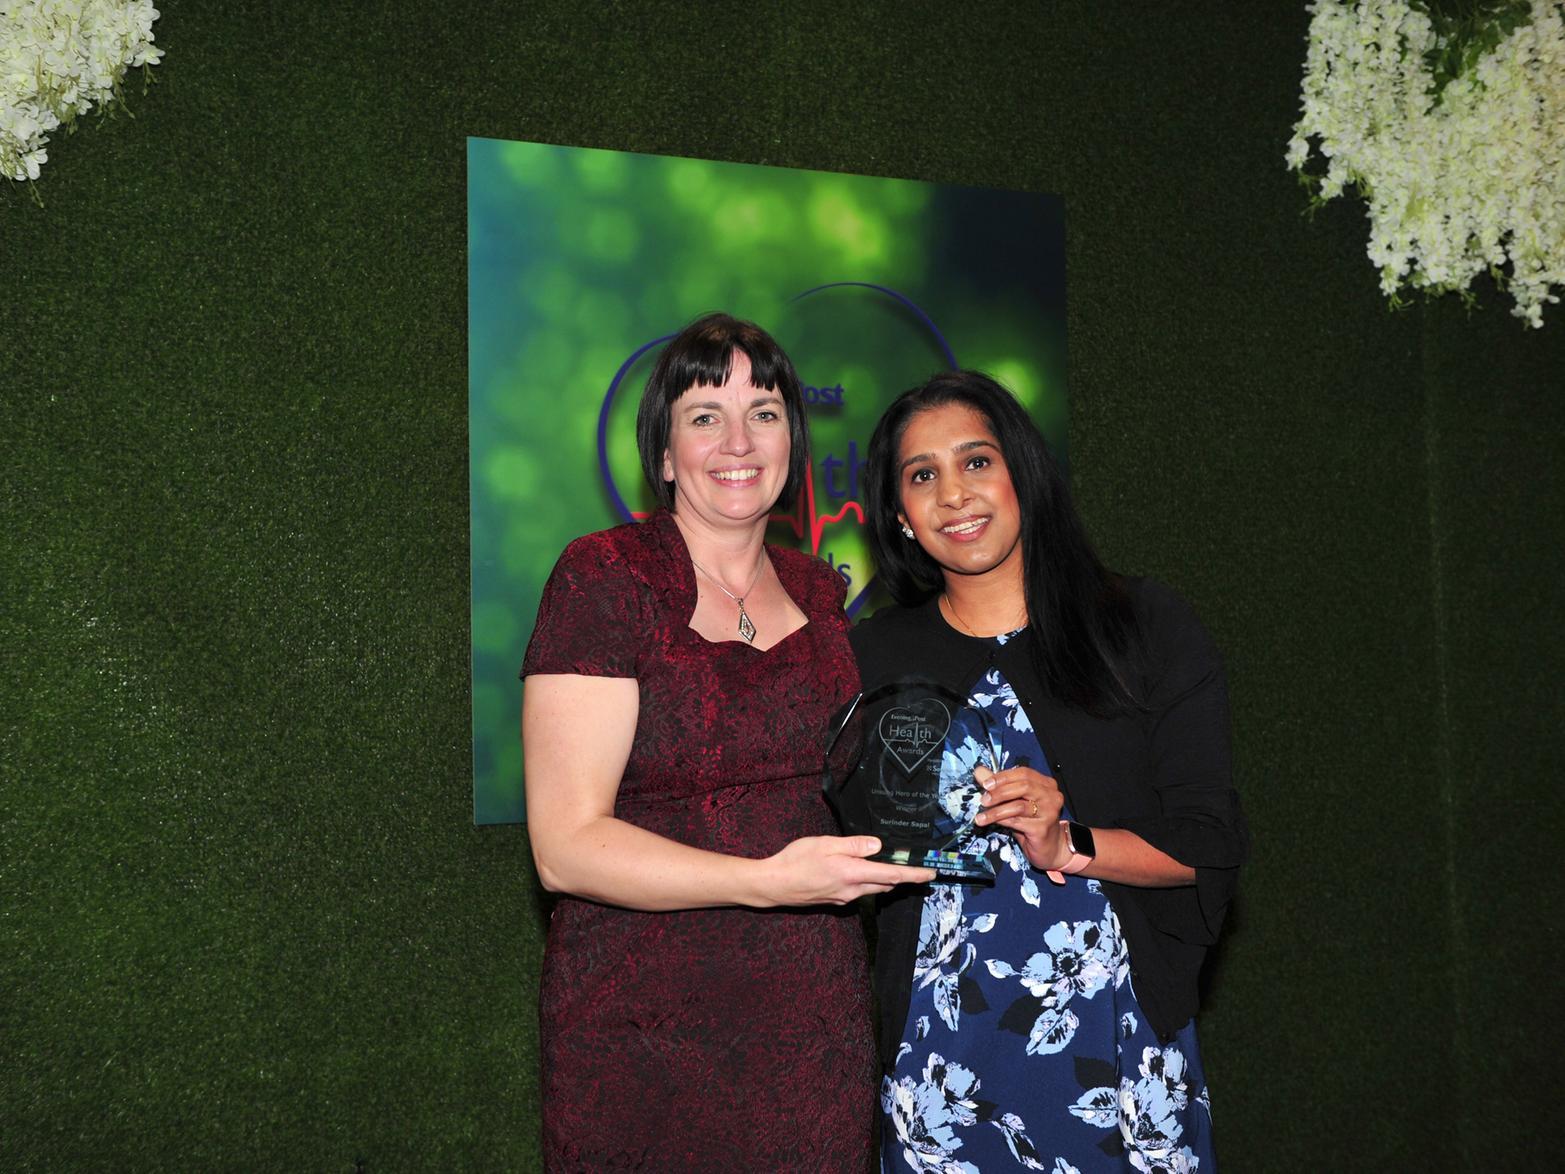 Surinder Sapal, pictured right, radiographer at Leeds Teaching Hospitals NHS Trust, wins Unsung Hero Award after donating a kidney to save the life of a desperately ill child.